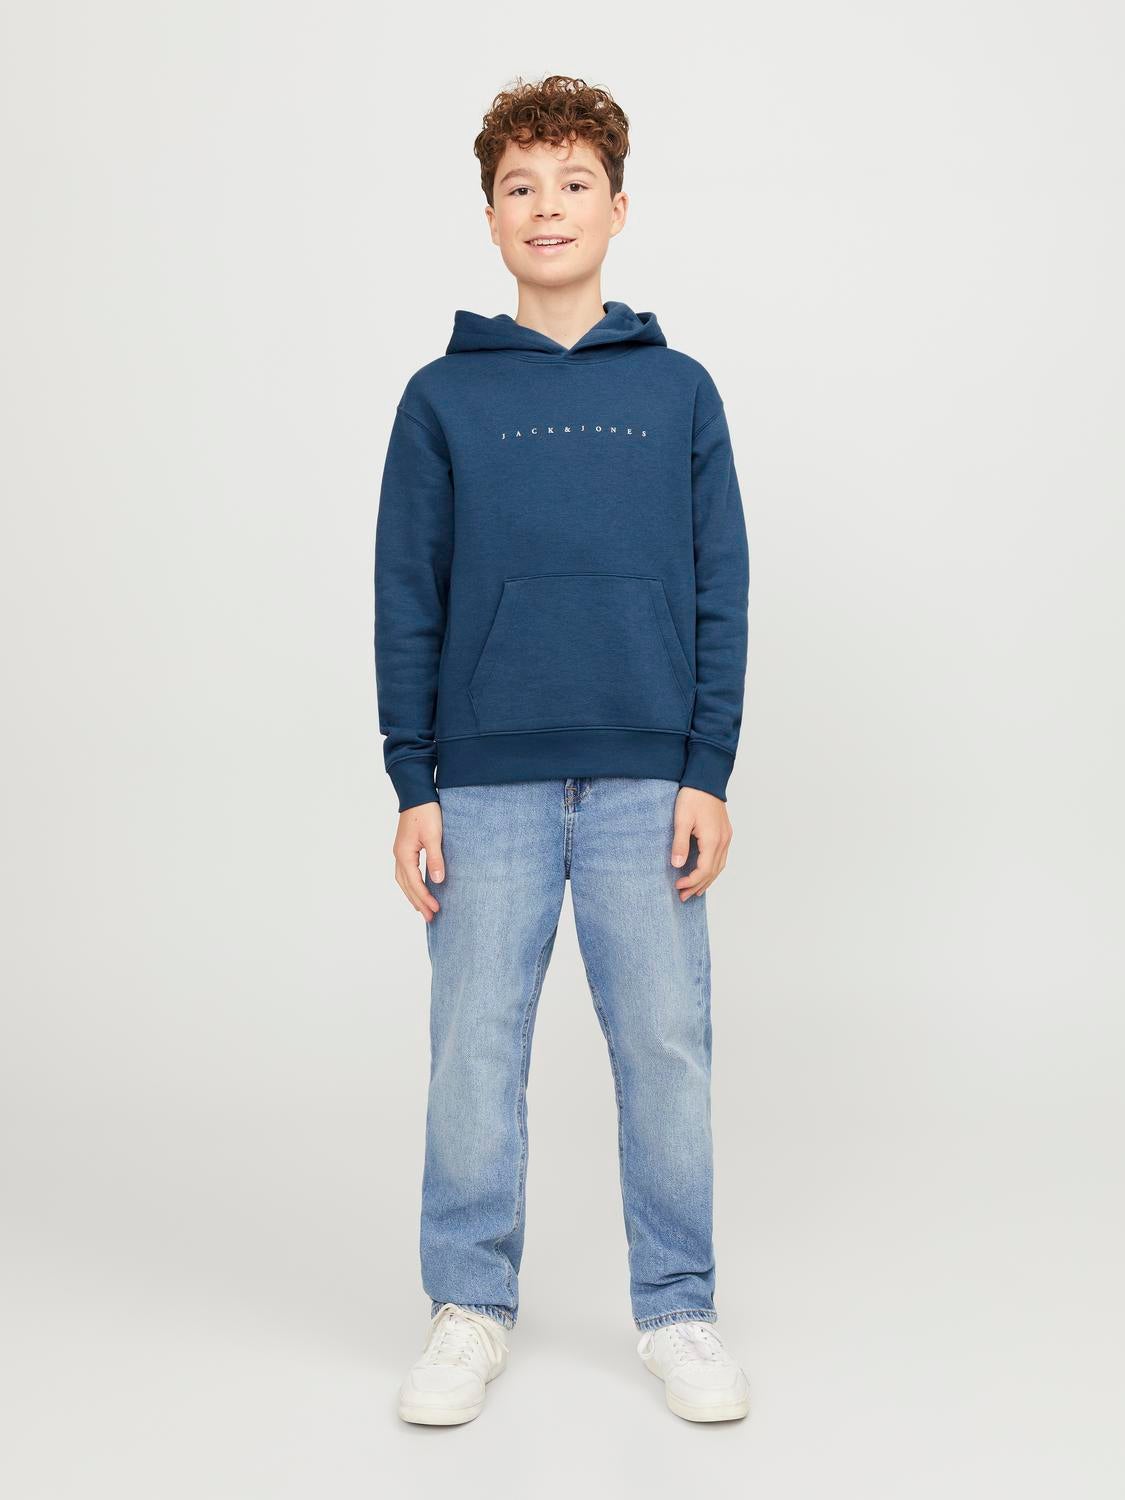 Hoodie For boys